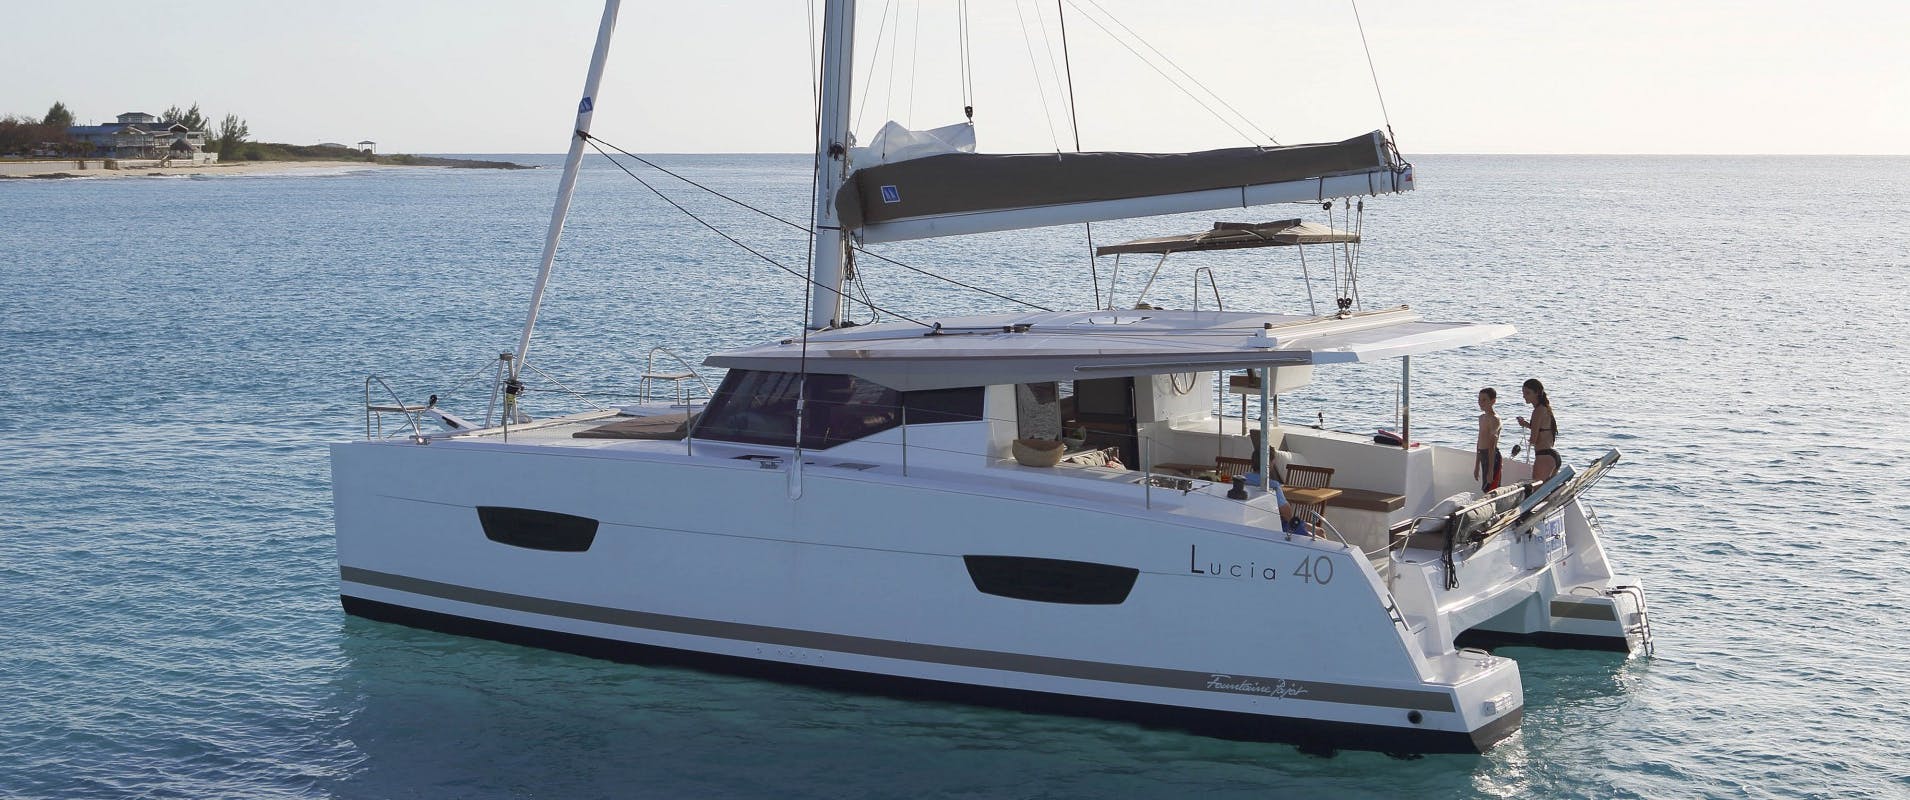 Book Fountaine Pajot Lucia 40 Catamaran for bareboat charter in St. Petersburg, Vinoy Marina, Florida, USA with TripYacht!, picture 1